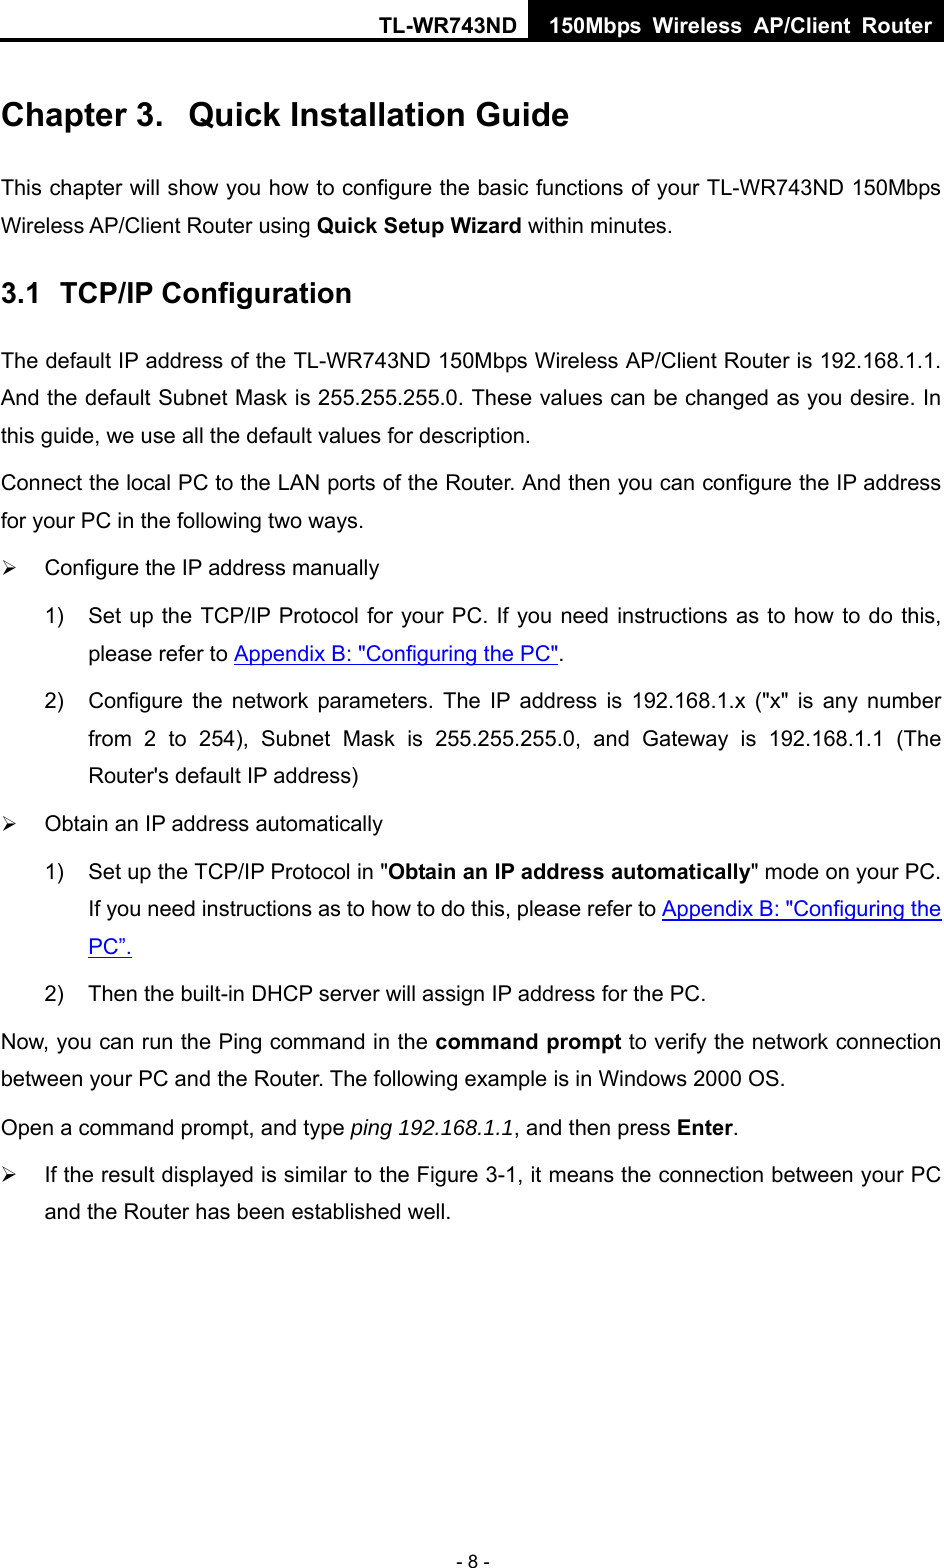 TL-WR743ND 150Mbps Wireless AP/Client Router - 8 - Chapter 3.  Quick Installation Guide This chapter will show you how to configure the basic functions of your TL-WR743ND 150Mbps Wireless AP/Client Router using Quick Setup Wizard within minutes. 3.1  TCP/IP Configuration The default IP address of the TL-WR743ND 150Mbps Wireless AP/Client Router is 192.168.1.1. And the default Subnet Mask is 255.255.255.0. These values can be changed as you desire. In this guide, we use all the default values for description. Connect the local PC to the LAN ports of the Router. And then you can configure the IP address for your PC in the following two ways. ¾ Configure the IP address manually 1)  Set up the TCP/IP Protocol for your PC. If you need instructions as to how to do this, please refer to Appendix B: &quot;Configuring the PC&quot;. 2)  Configure the network parameters. The IP address is 192.168.1.x (&quot;x&quot; is any number from 2 to 254), Subnet Mask is 255.255.255.0, and Gateway is 192.168.1.1 (The Router&apos;s default IP address) ¾ Obtain an IP address automatically 1)  Set up the TCP/IP Protocol in &quot;Obtain an IP address automatically&quot; mode on your PC. If you need instructions as to how to do this, please refer to Appendix B: &quot;Configuring the PC”. 2)  Then the built-in DHCP server will assign IP address for the PC. Now, you can run the Ping command in the command prompt to verify the network connection between your PC and the Router. The following example is in Windows 2000 OS. Open a command prompt, and type ping 192.168.1.1, and then press Enter. ¾  If the result displayed is similar to the Figure 3-1, it means the connection between your PC and the Router has been established well.   